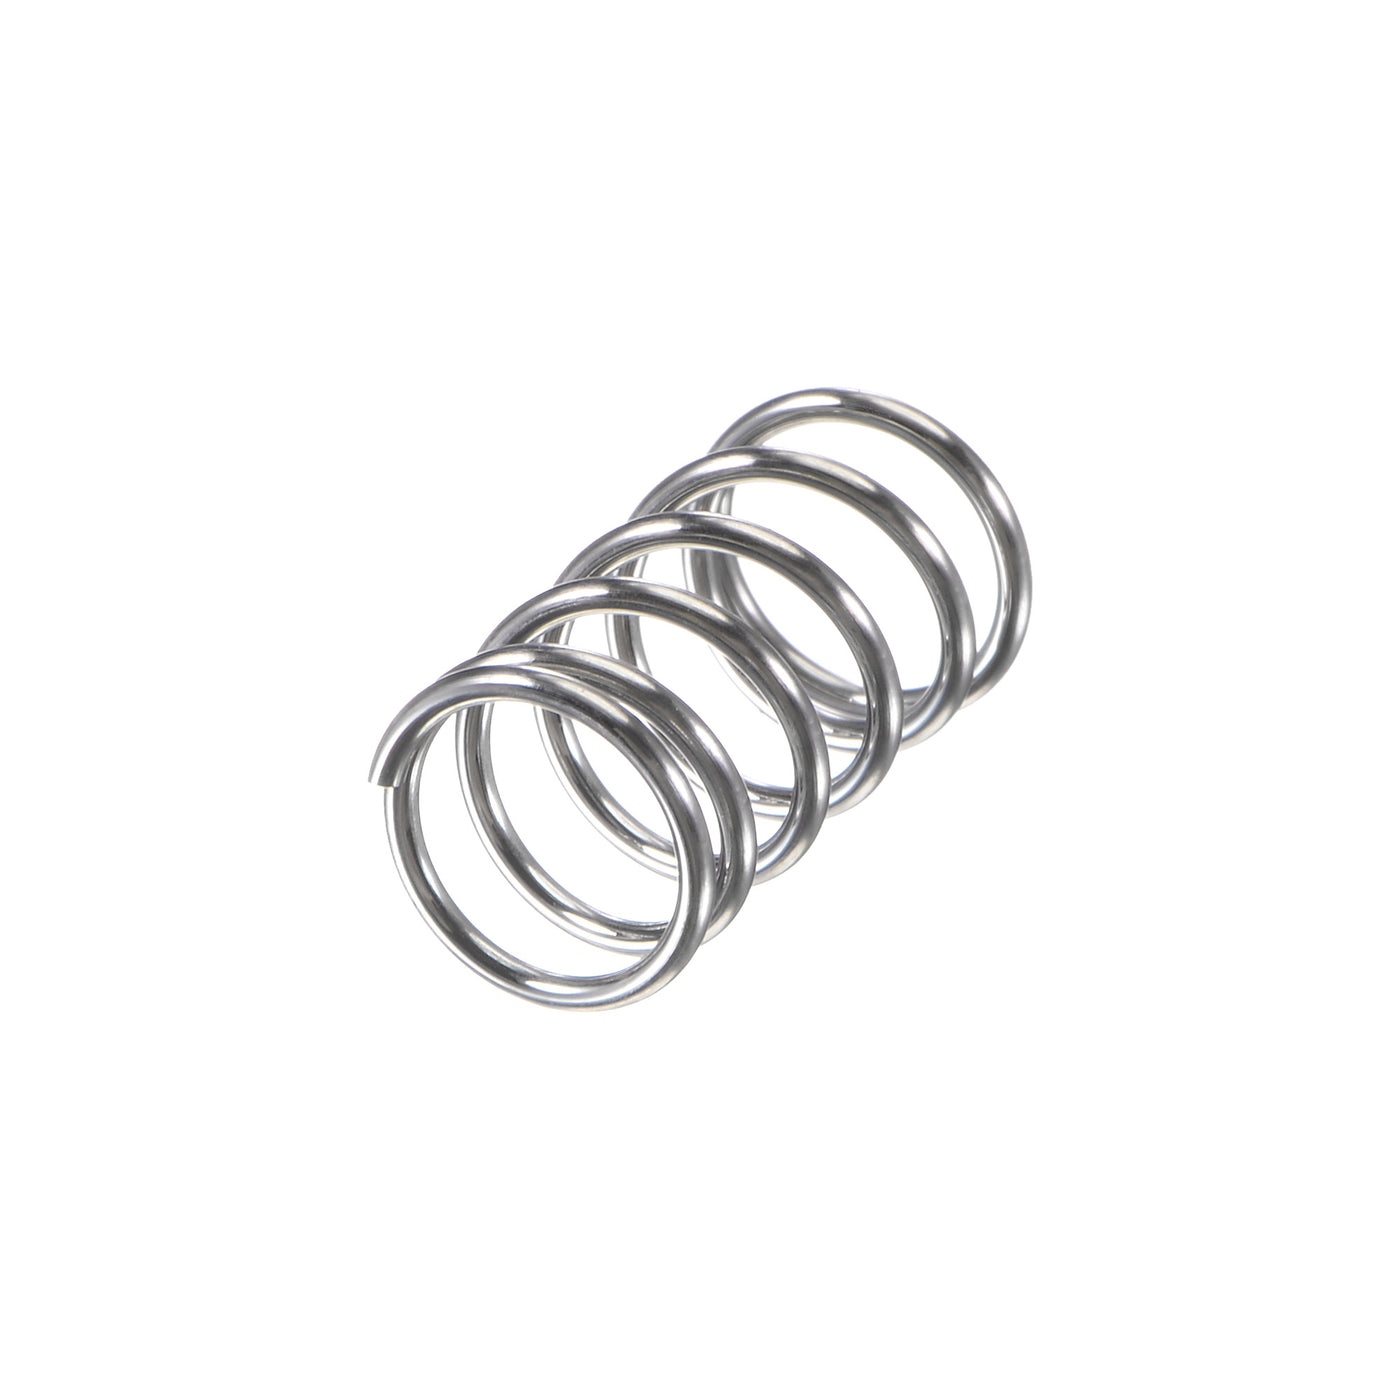 uxcell Uxcell 8mmx0.8mmx15mm 304 Stainless Steel Compression Spring 11.8N Load Capacity 30pcs